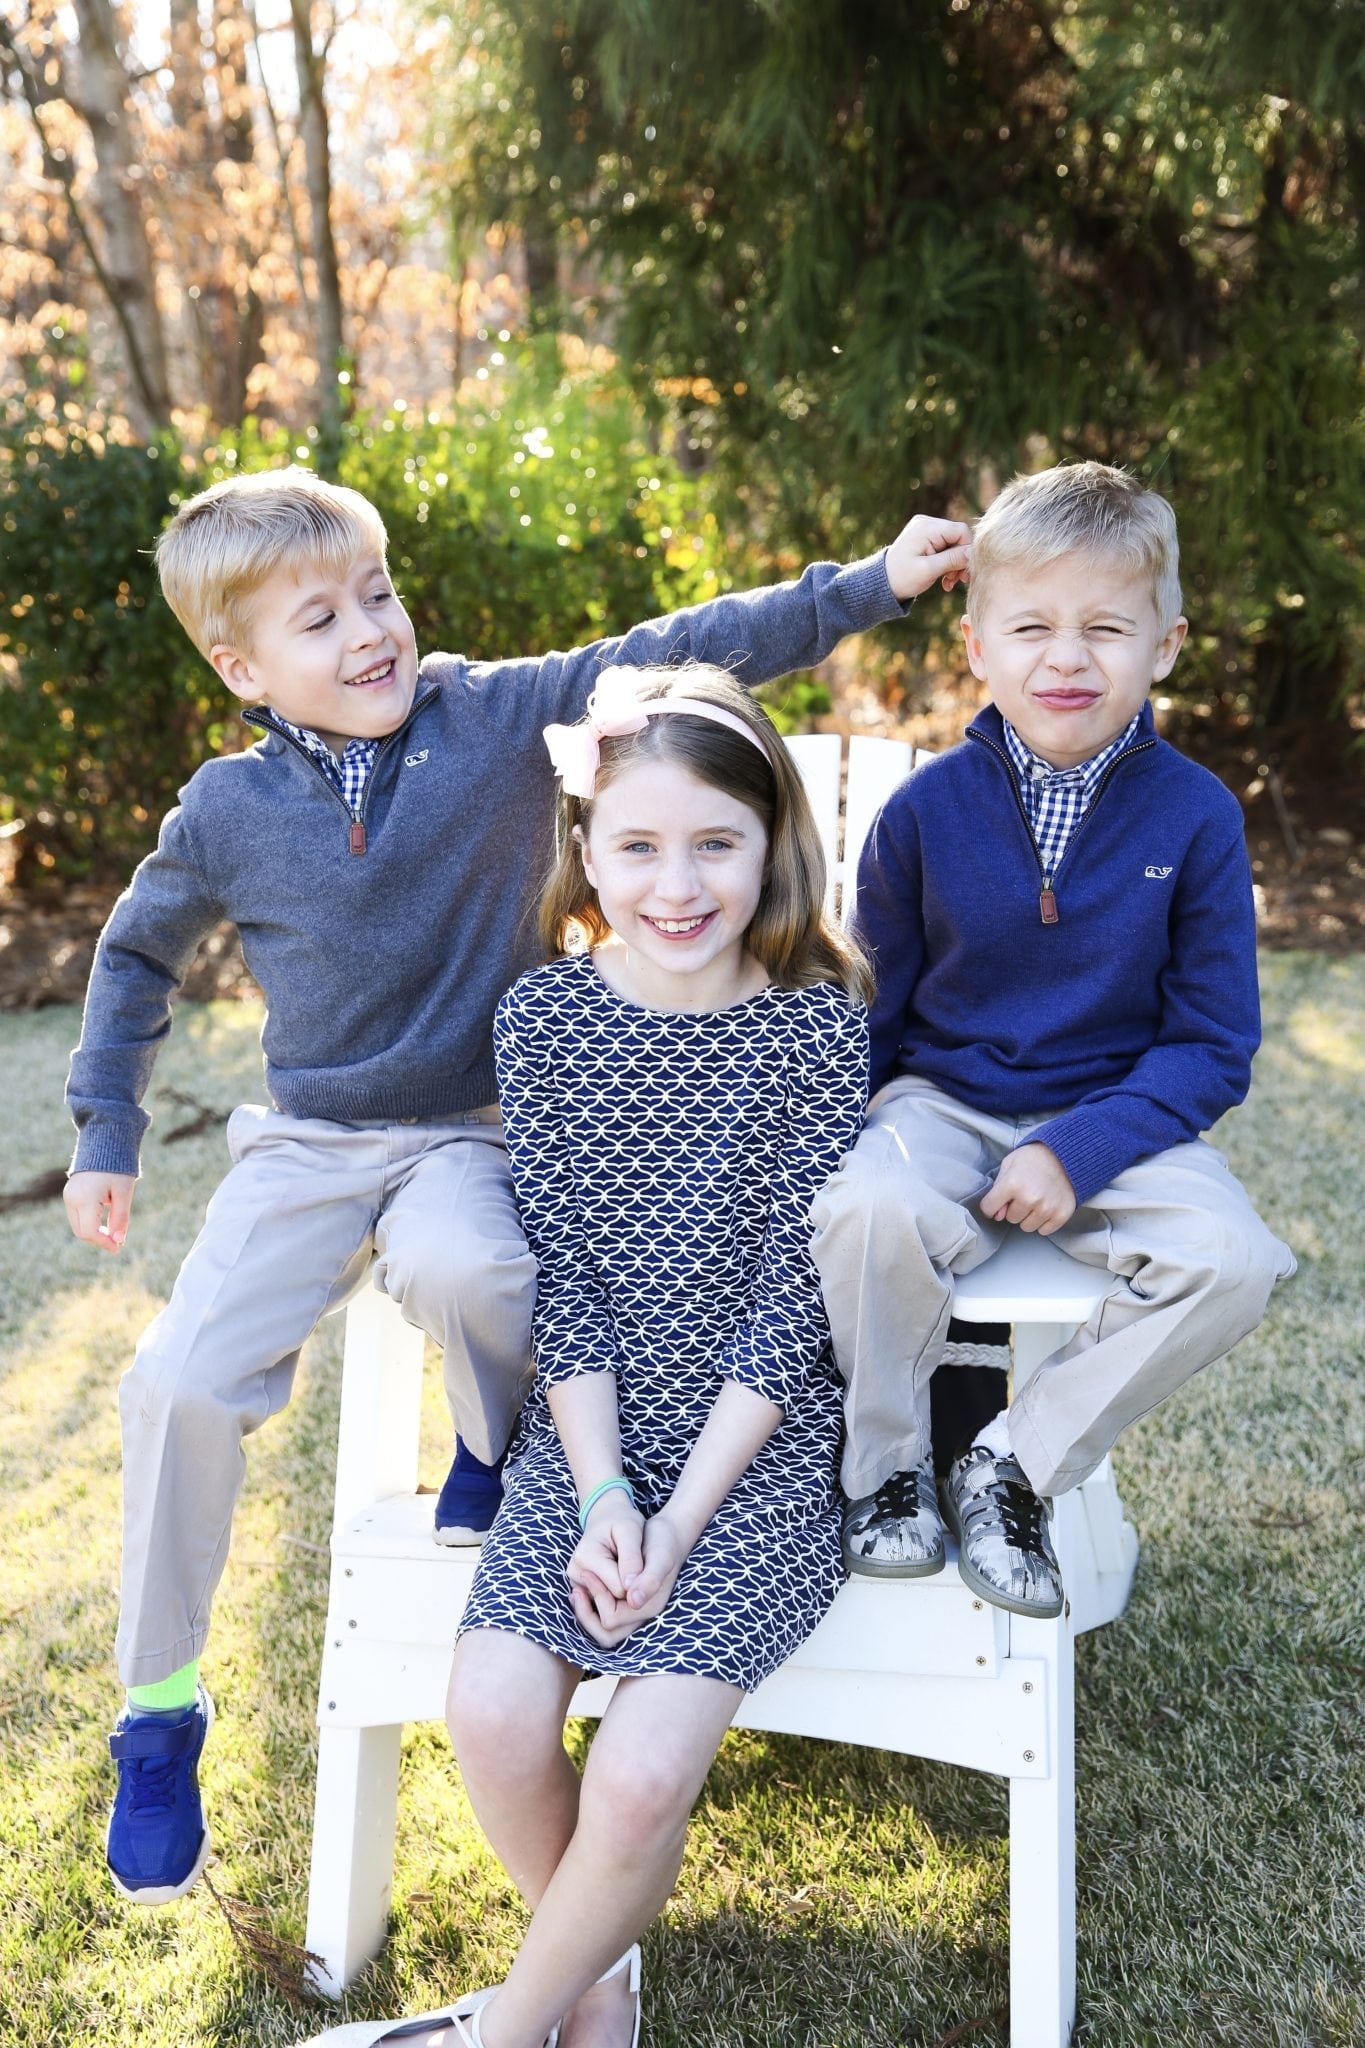 Vineyard Vines Clothes for Kids - My Sweet Three and their Southern Charm